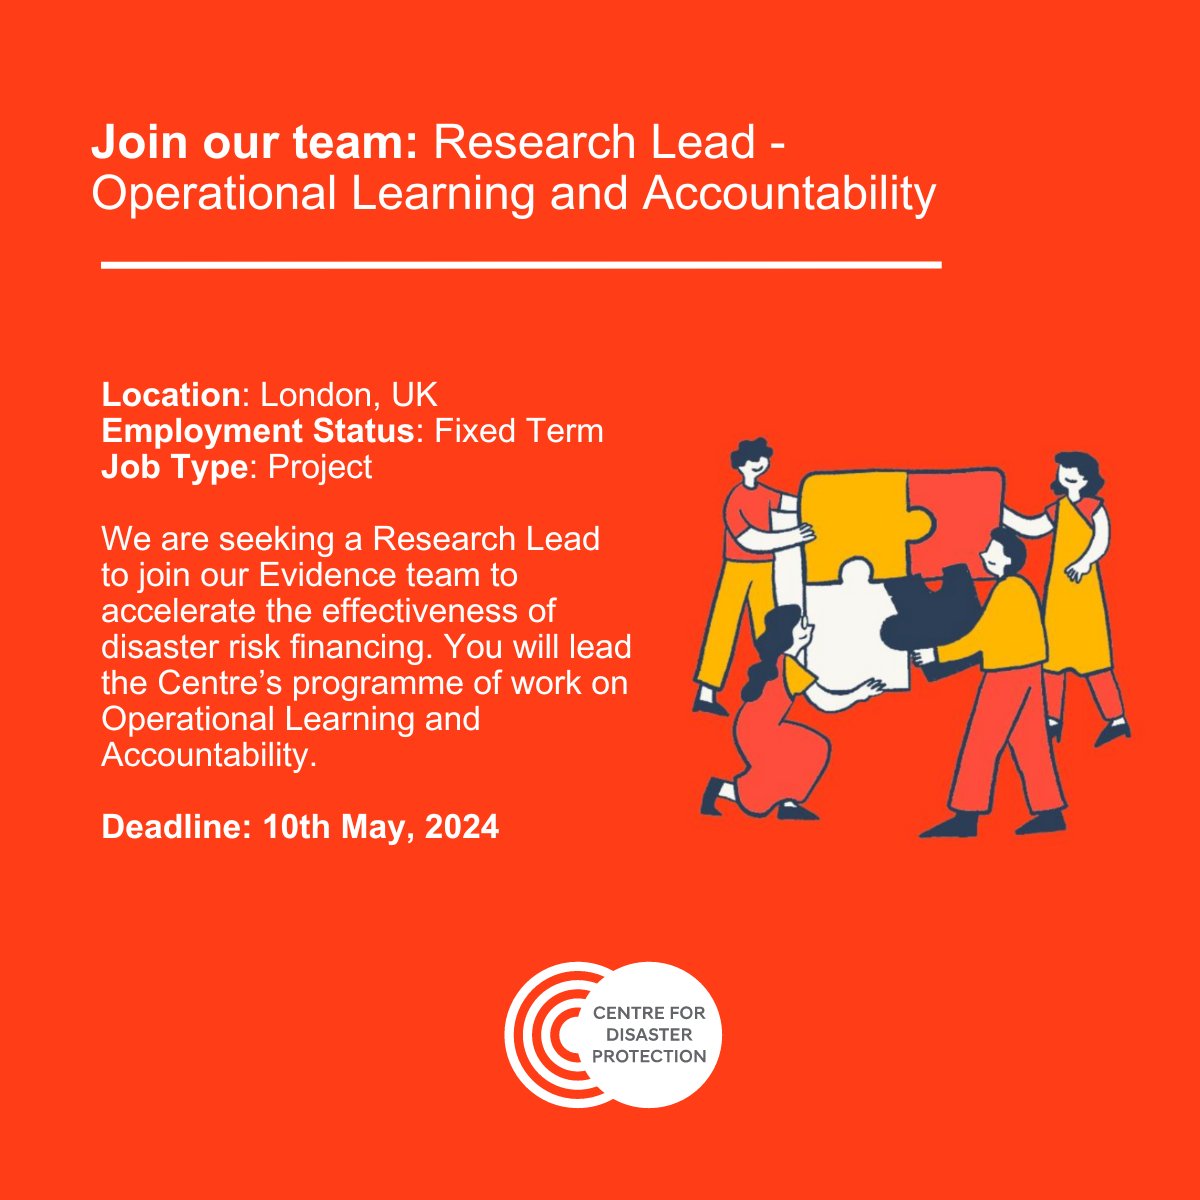 We are #hiring a Research Lead to join our Evidence team, leading on Operational Learning and Accountability. You will research barriers to disaster risk financing and have the opportunity to contribute to the Centre's evidence agenda. disasterprotection.org/join-us